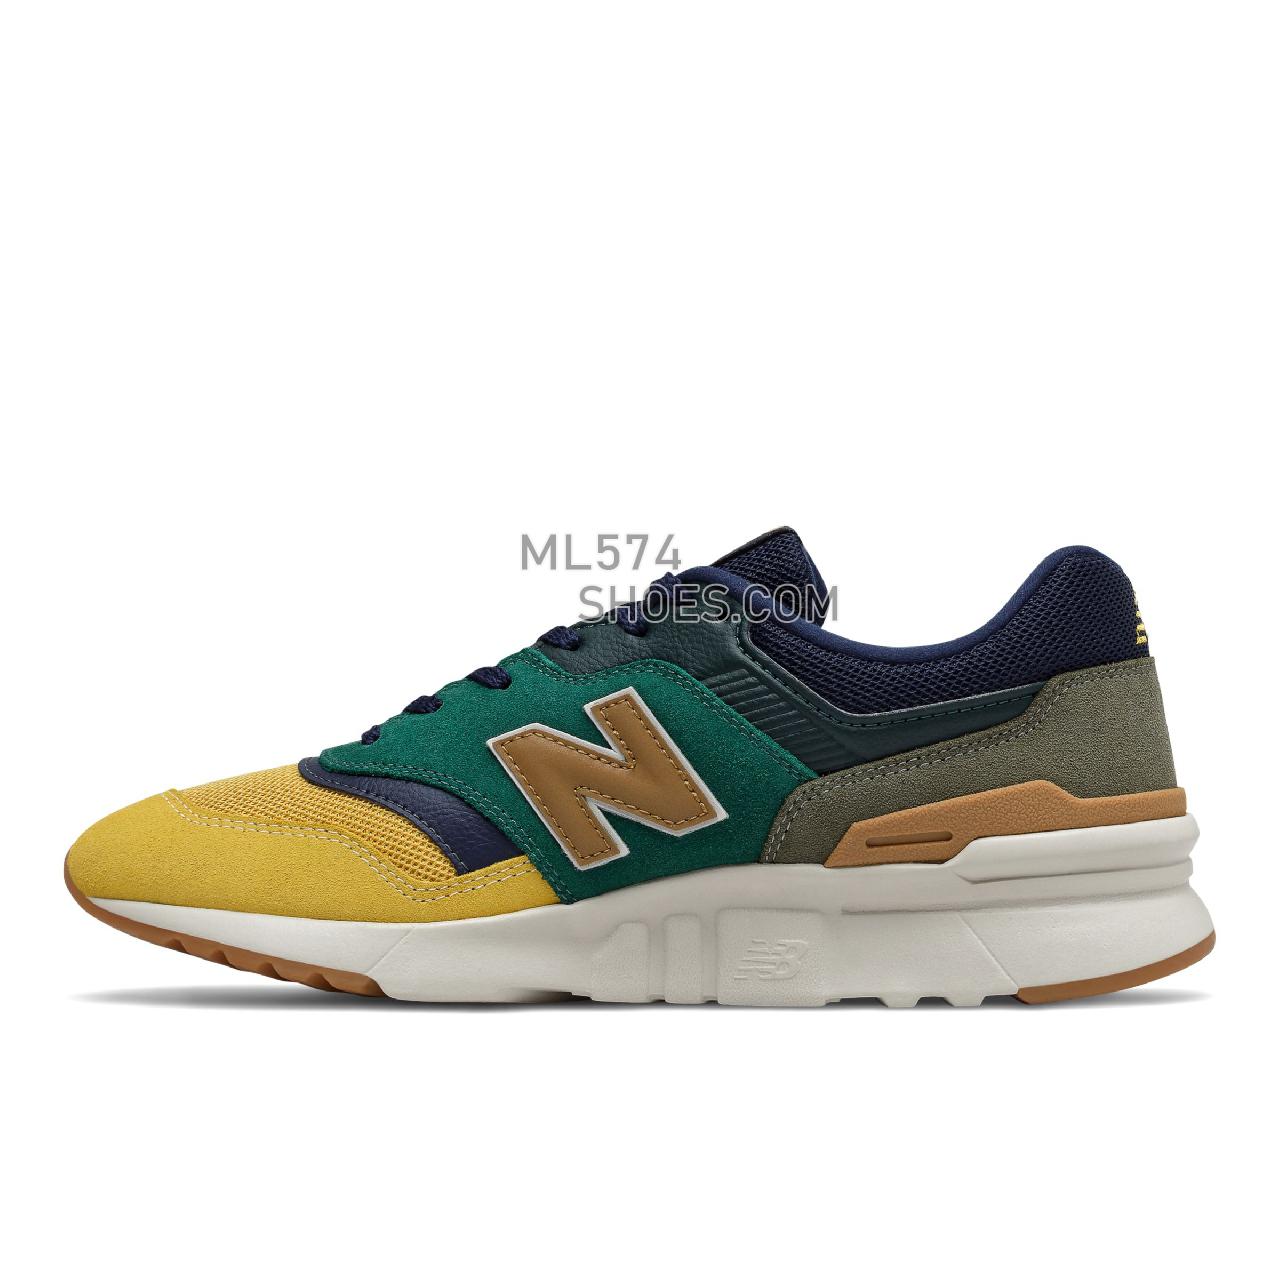 New Balance 997H - Men's Classic Sneakers - Spruce with Harvest Gold - CM997HVN